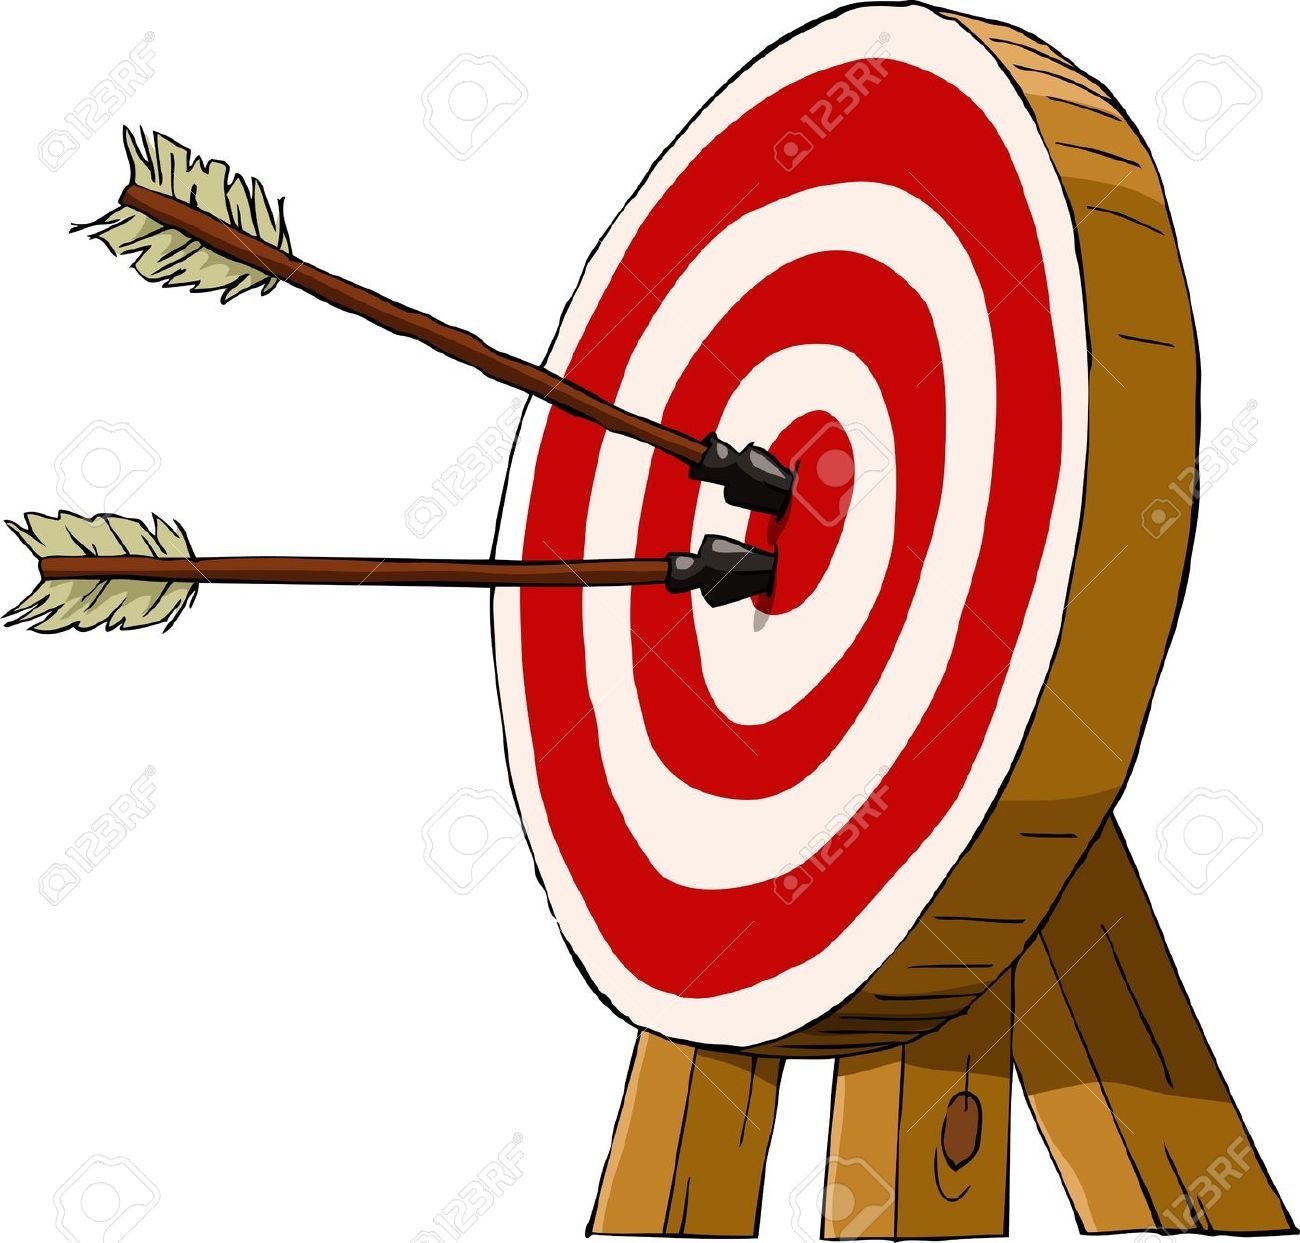 moving target clipart - photo #15